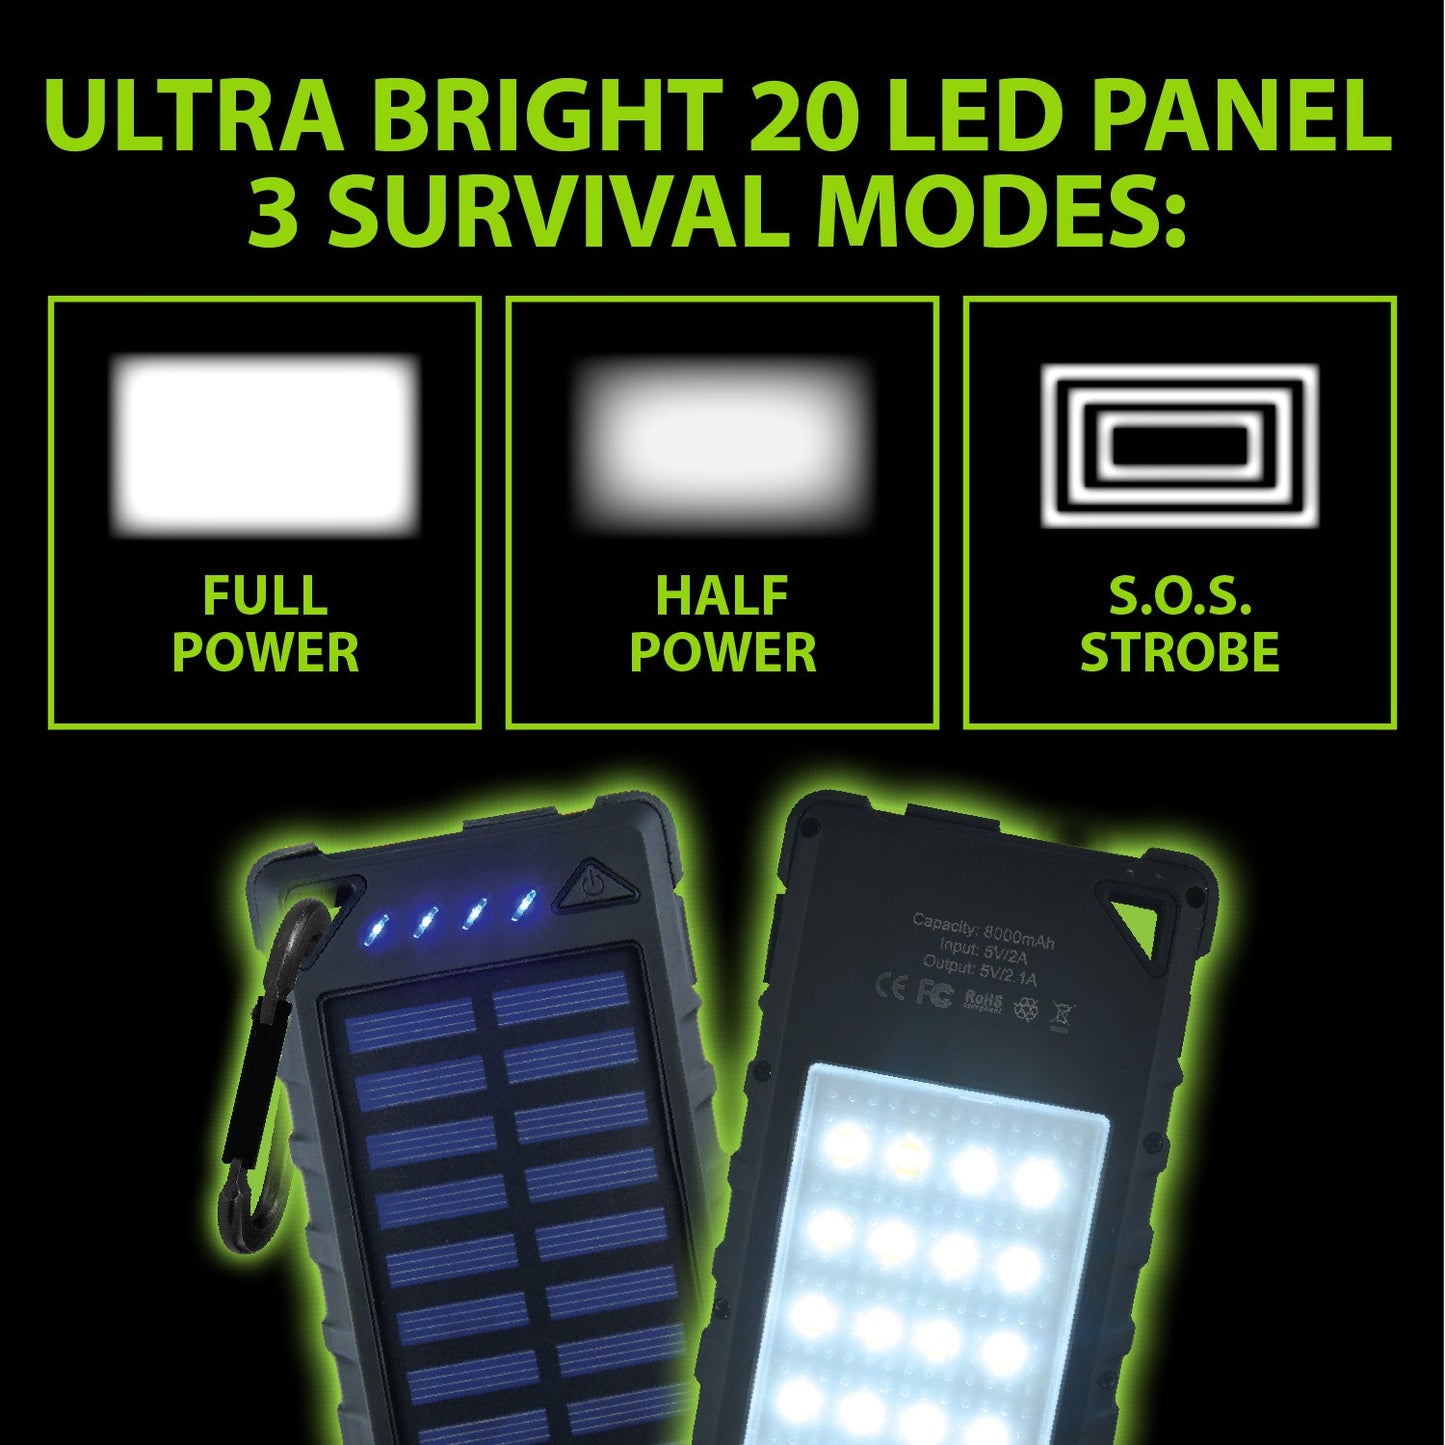 ITEM NUMBER 023517 LED SOLAR POWER BANK 4 PIECES PER DISPLAY